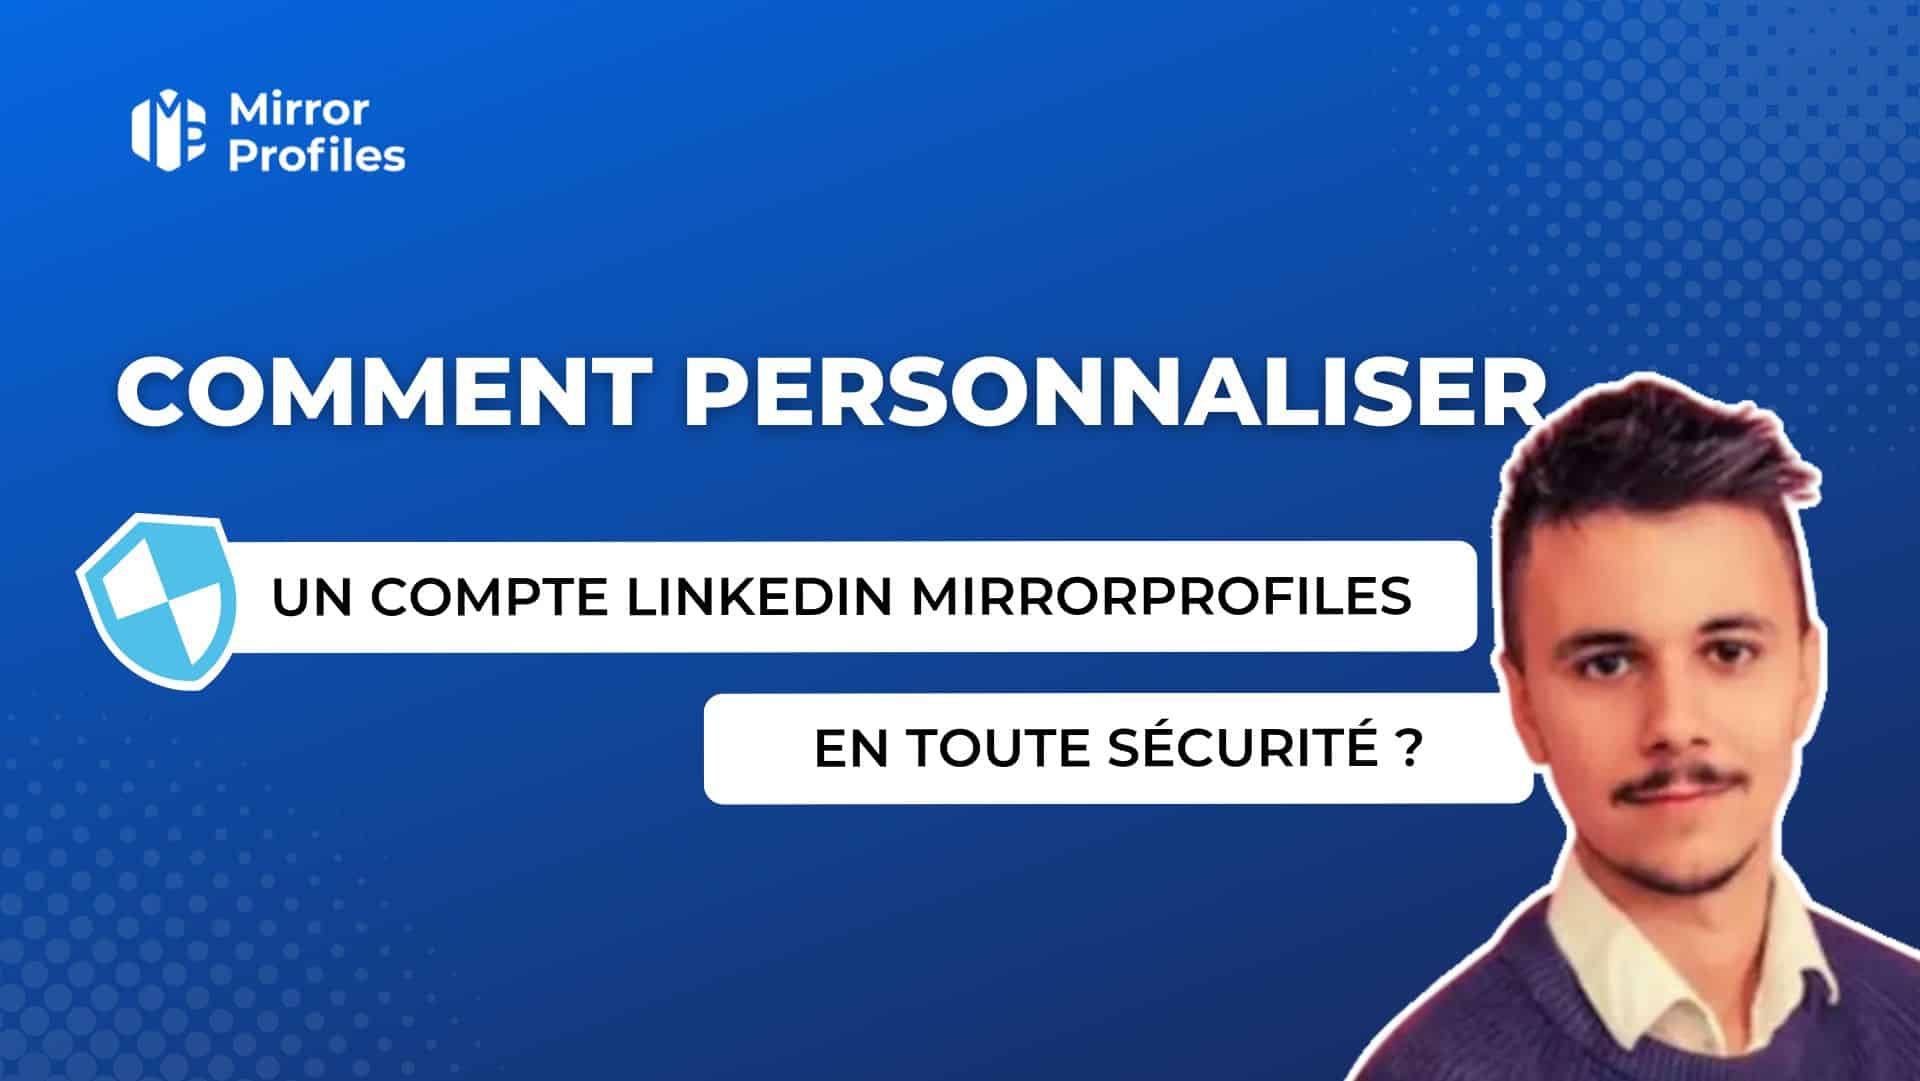 Promotional graphic for How to customize Linkedin MirrorProfiles safely, featuring a male with text overlays in French.